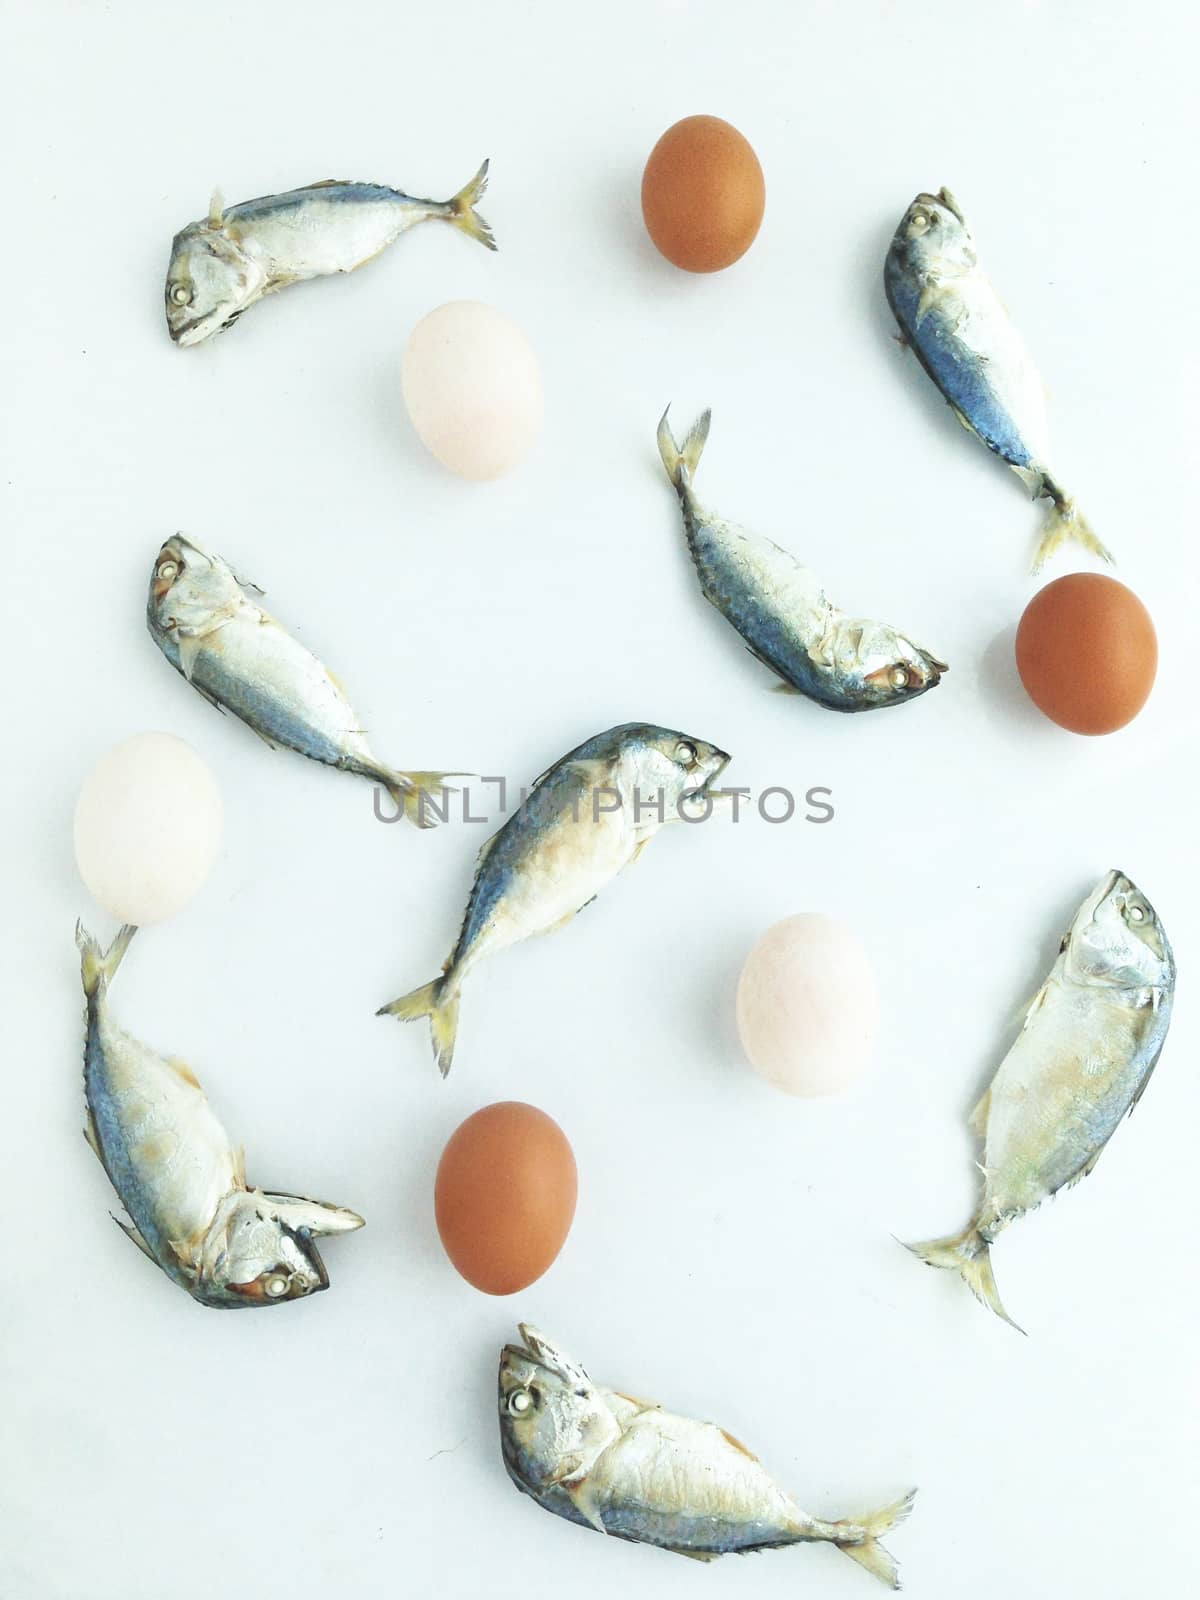 Short mackerel with duck and chicken eggs by Bowonpat